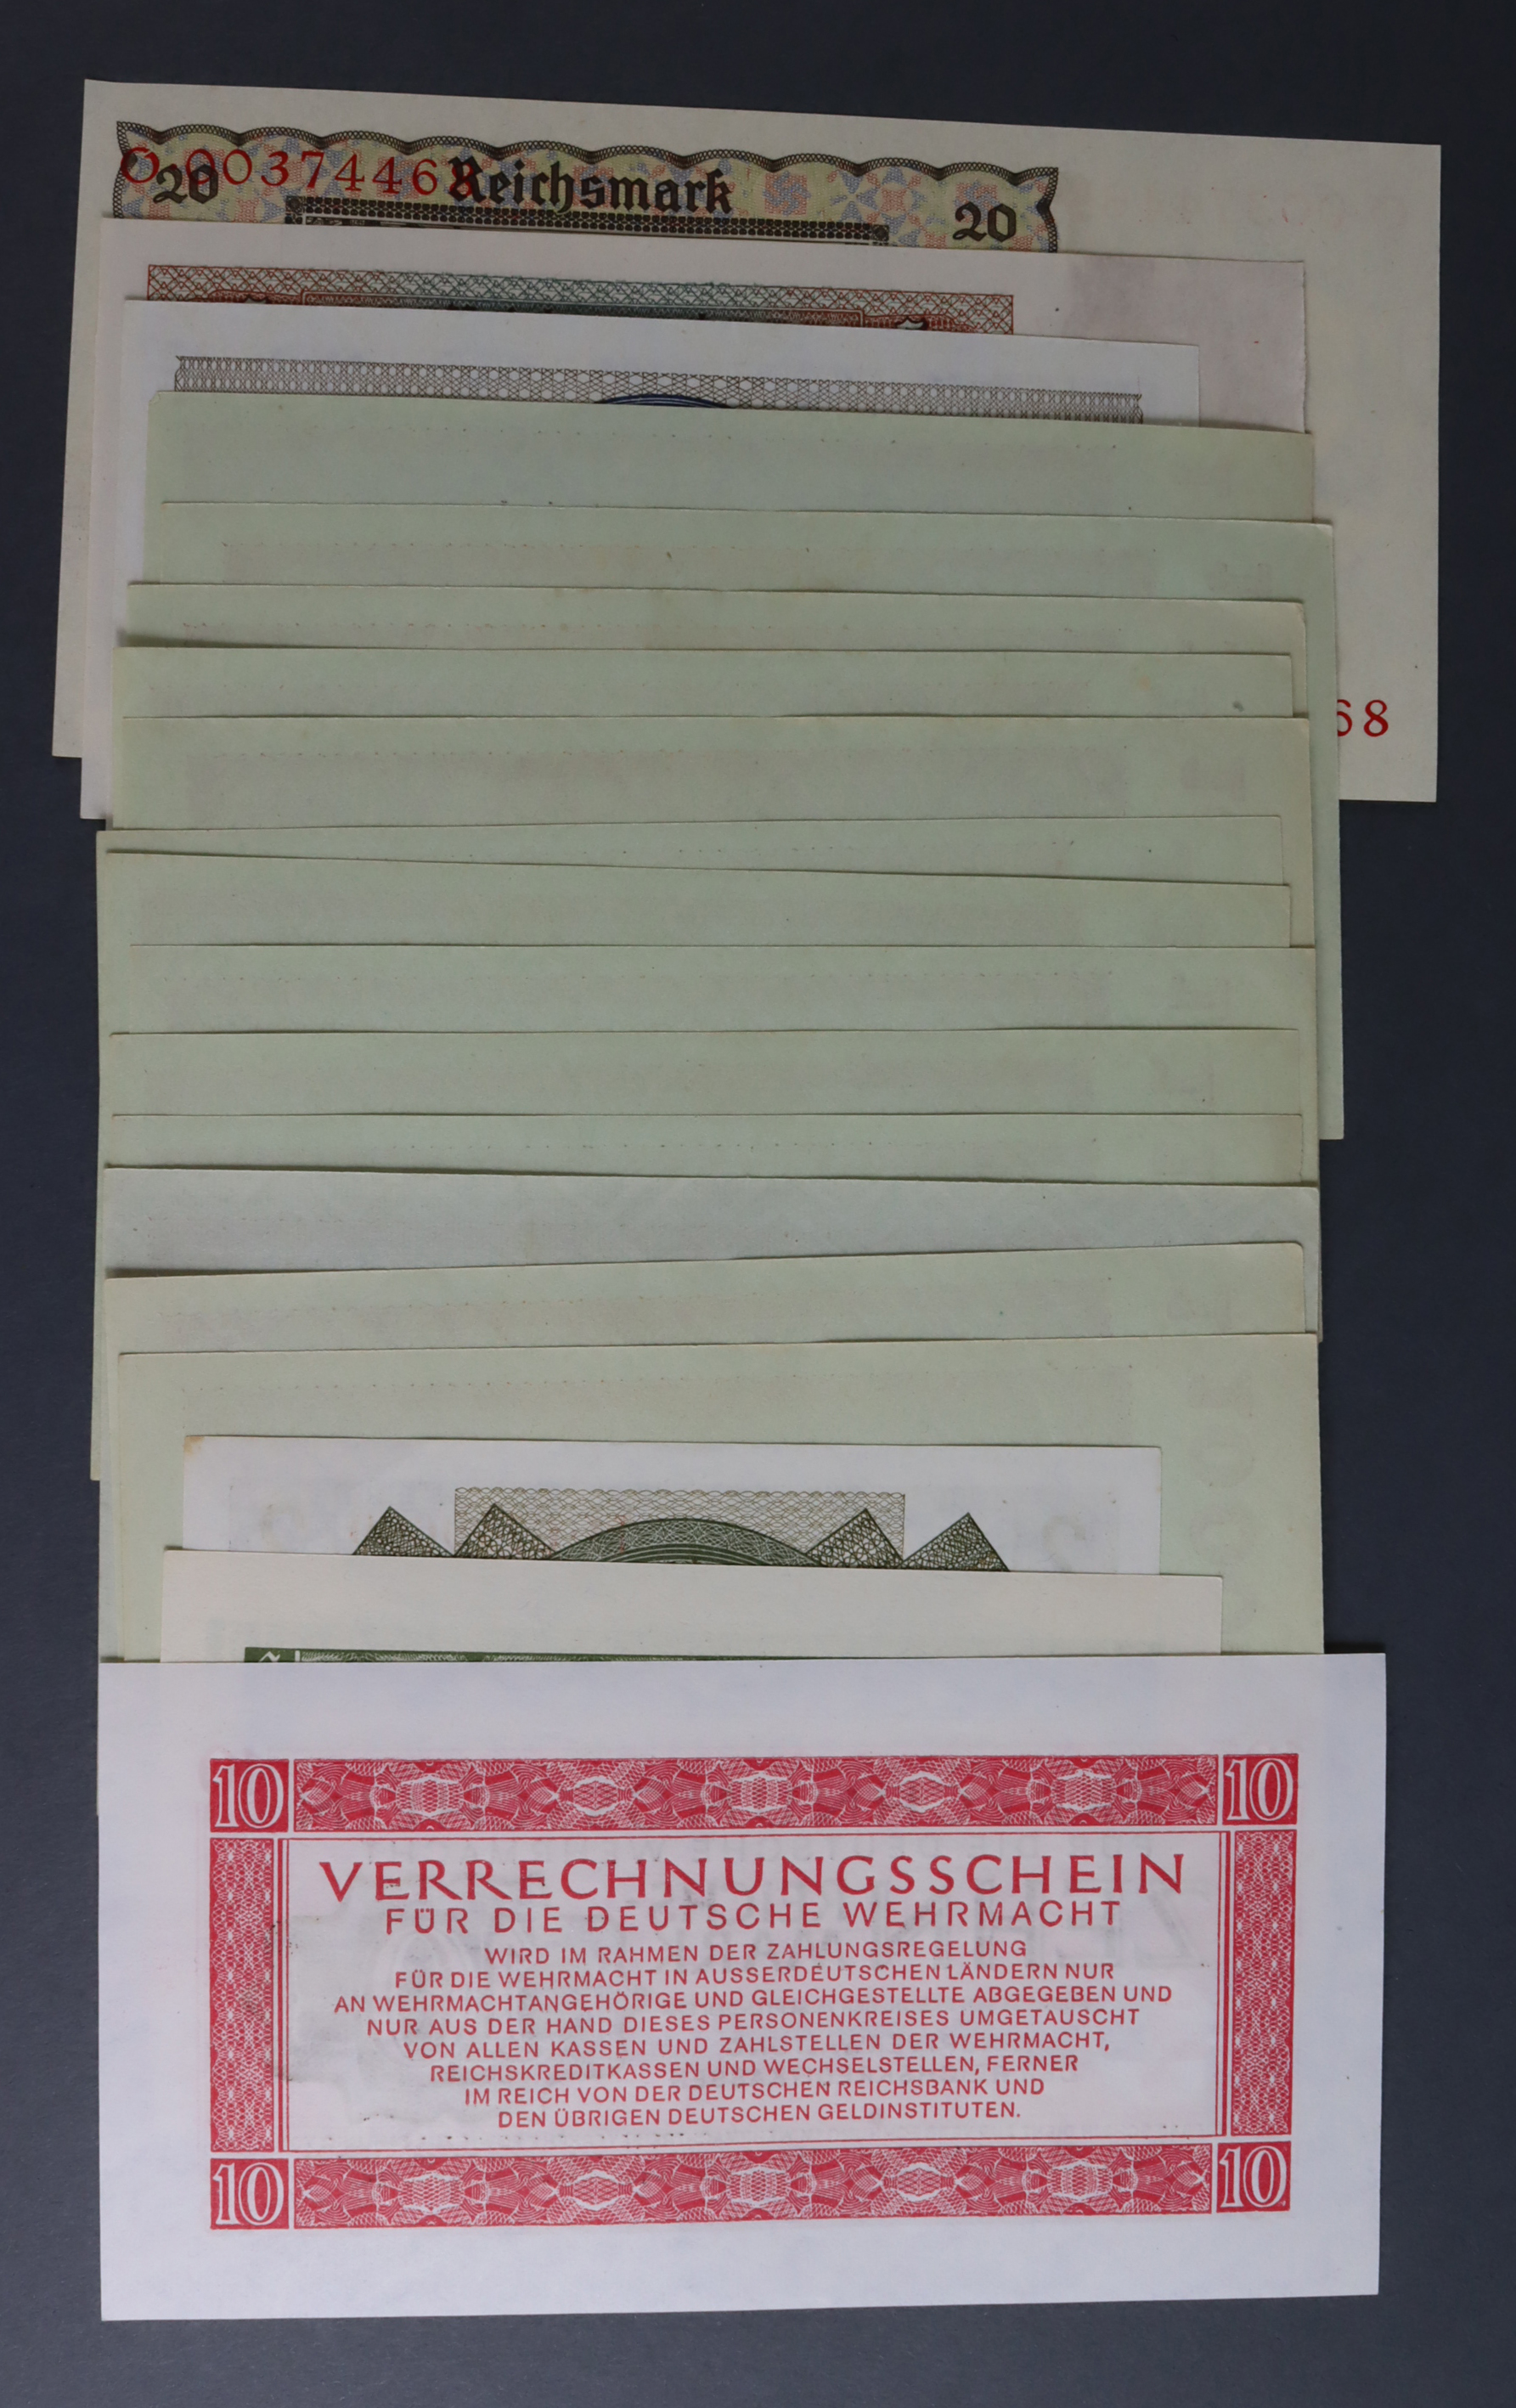 Germany (19), 1 Reichsmark & 10 Reichsmark dated 15th September 1944, WW2 Military Wehrmacht - Image 2 of 2